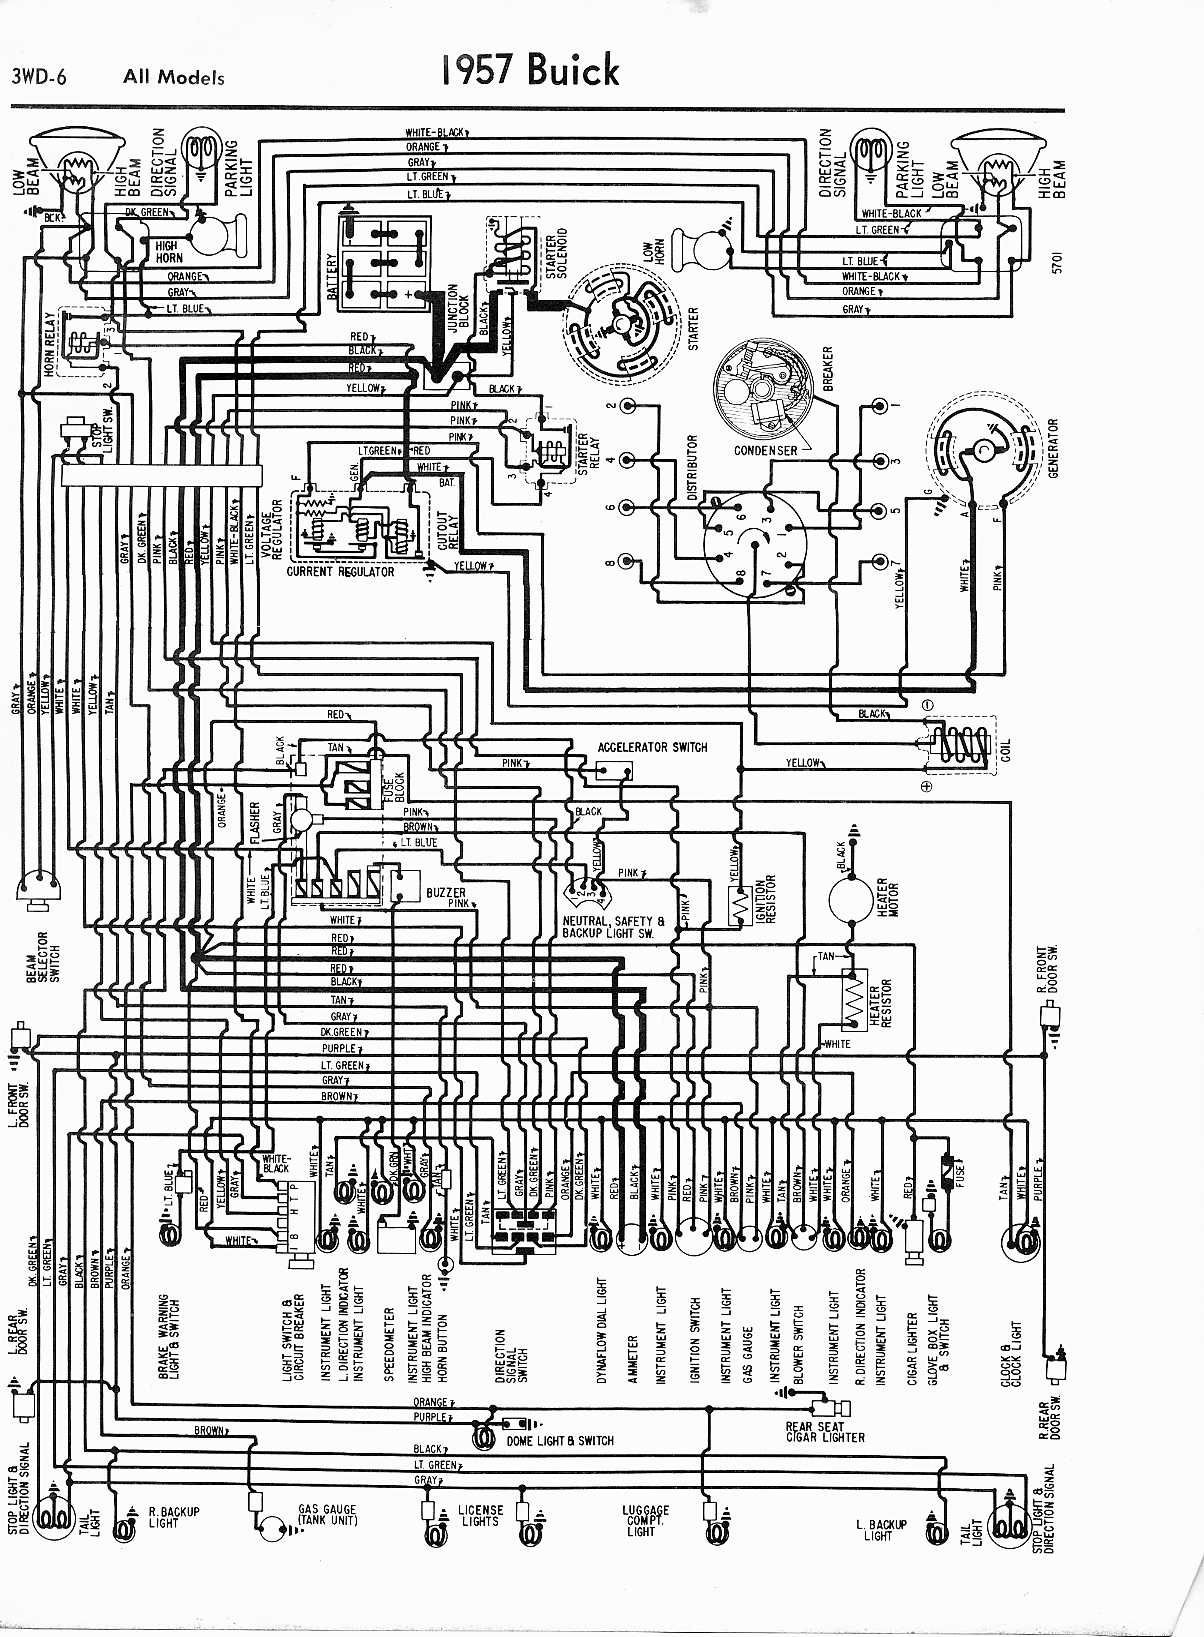 Buick Wiring Diagrams - Trusted Wiring Diagrams 1959 buick lesabre wiring diagram 